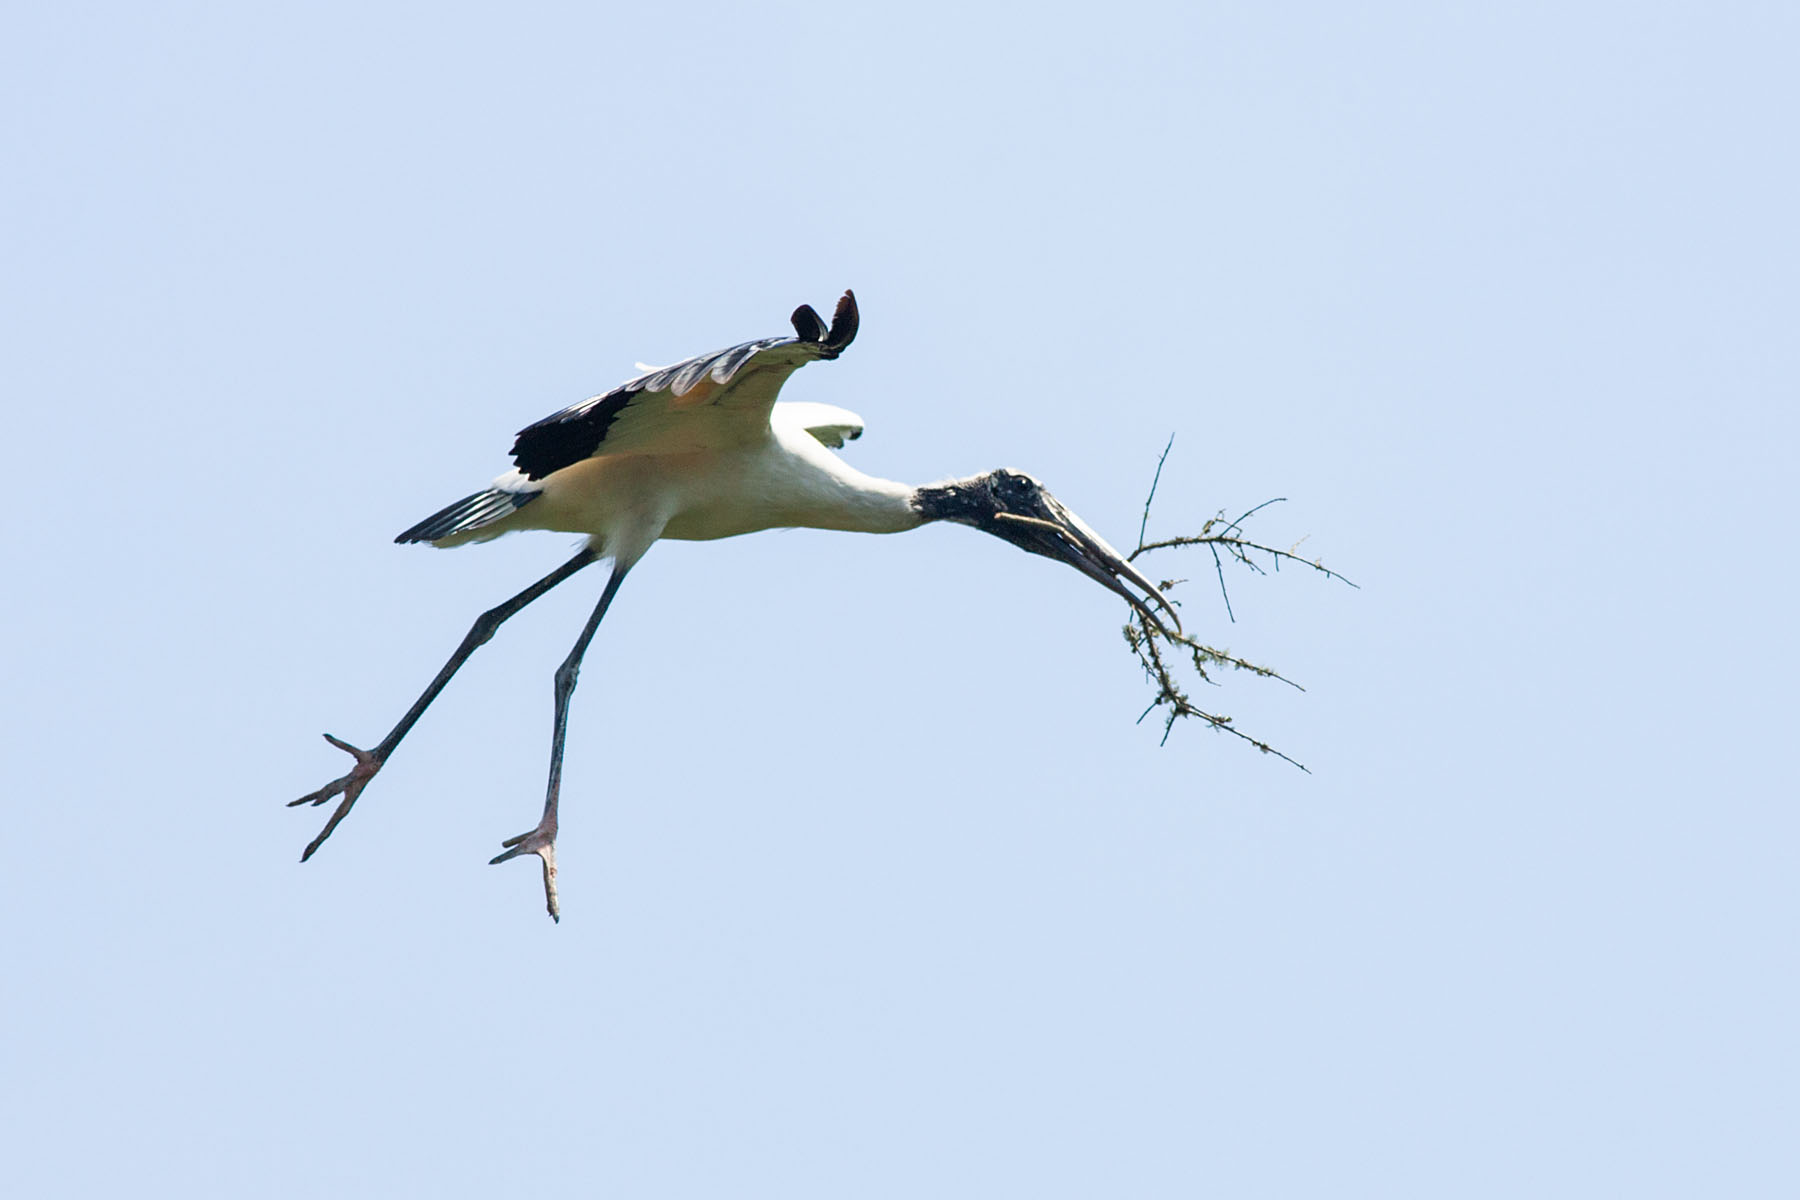 Wood Stork carrying nesting material, St. Augustine Alligator Farm, April 2006.  Click for next photo.